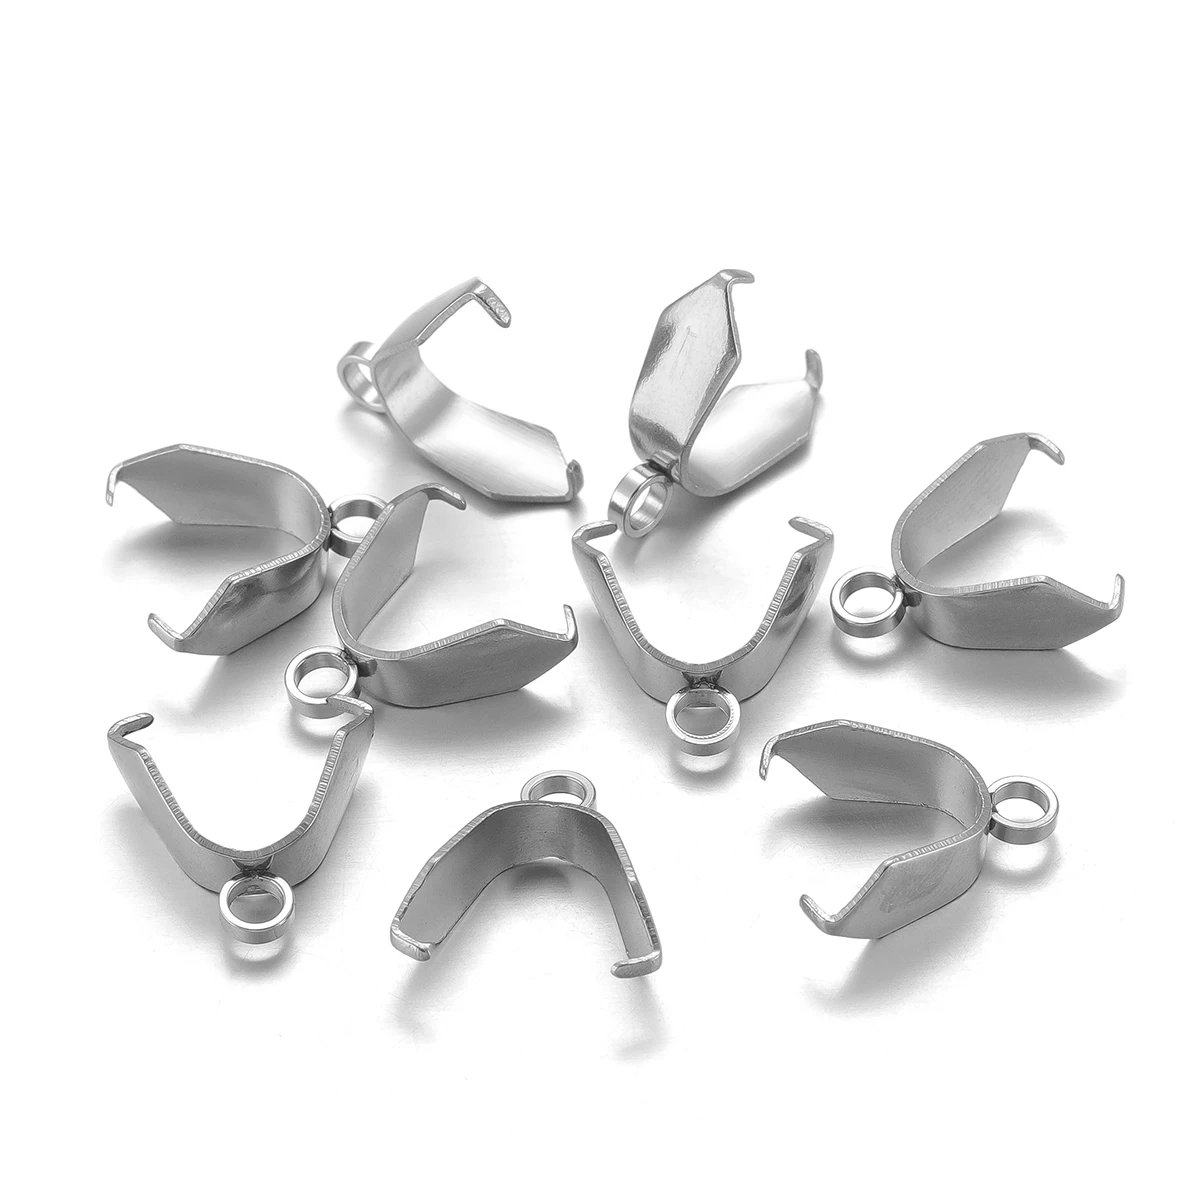 

10-20Pcs/Bag Stainless Steel Pendant Clip Melon Seeds Buckle Clasp Connectors Clip Pinch Bail Clasp Necklace DIY Jewelry Making